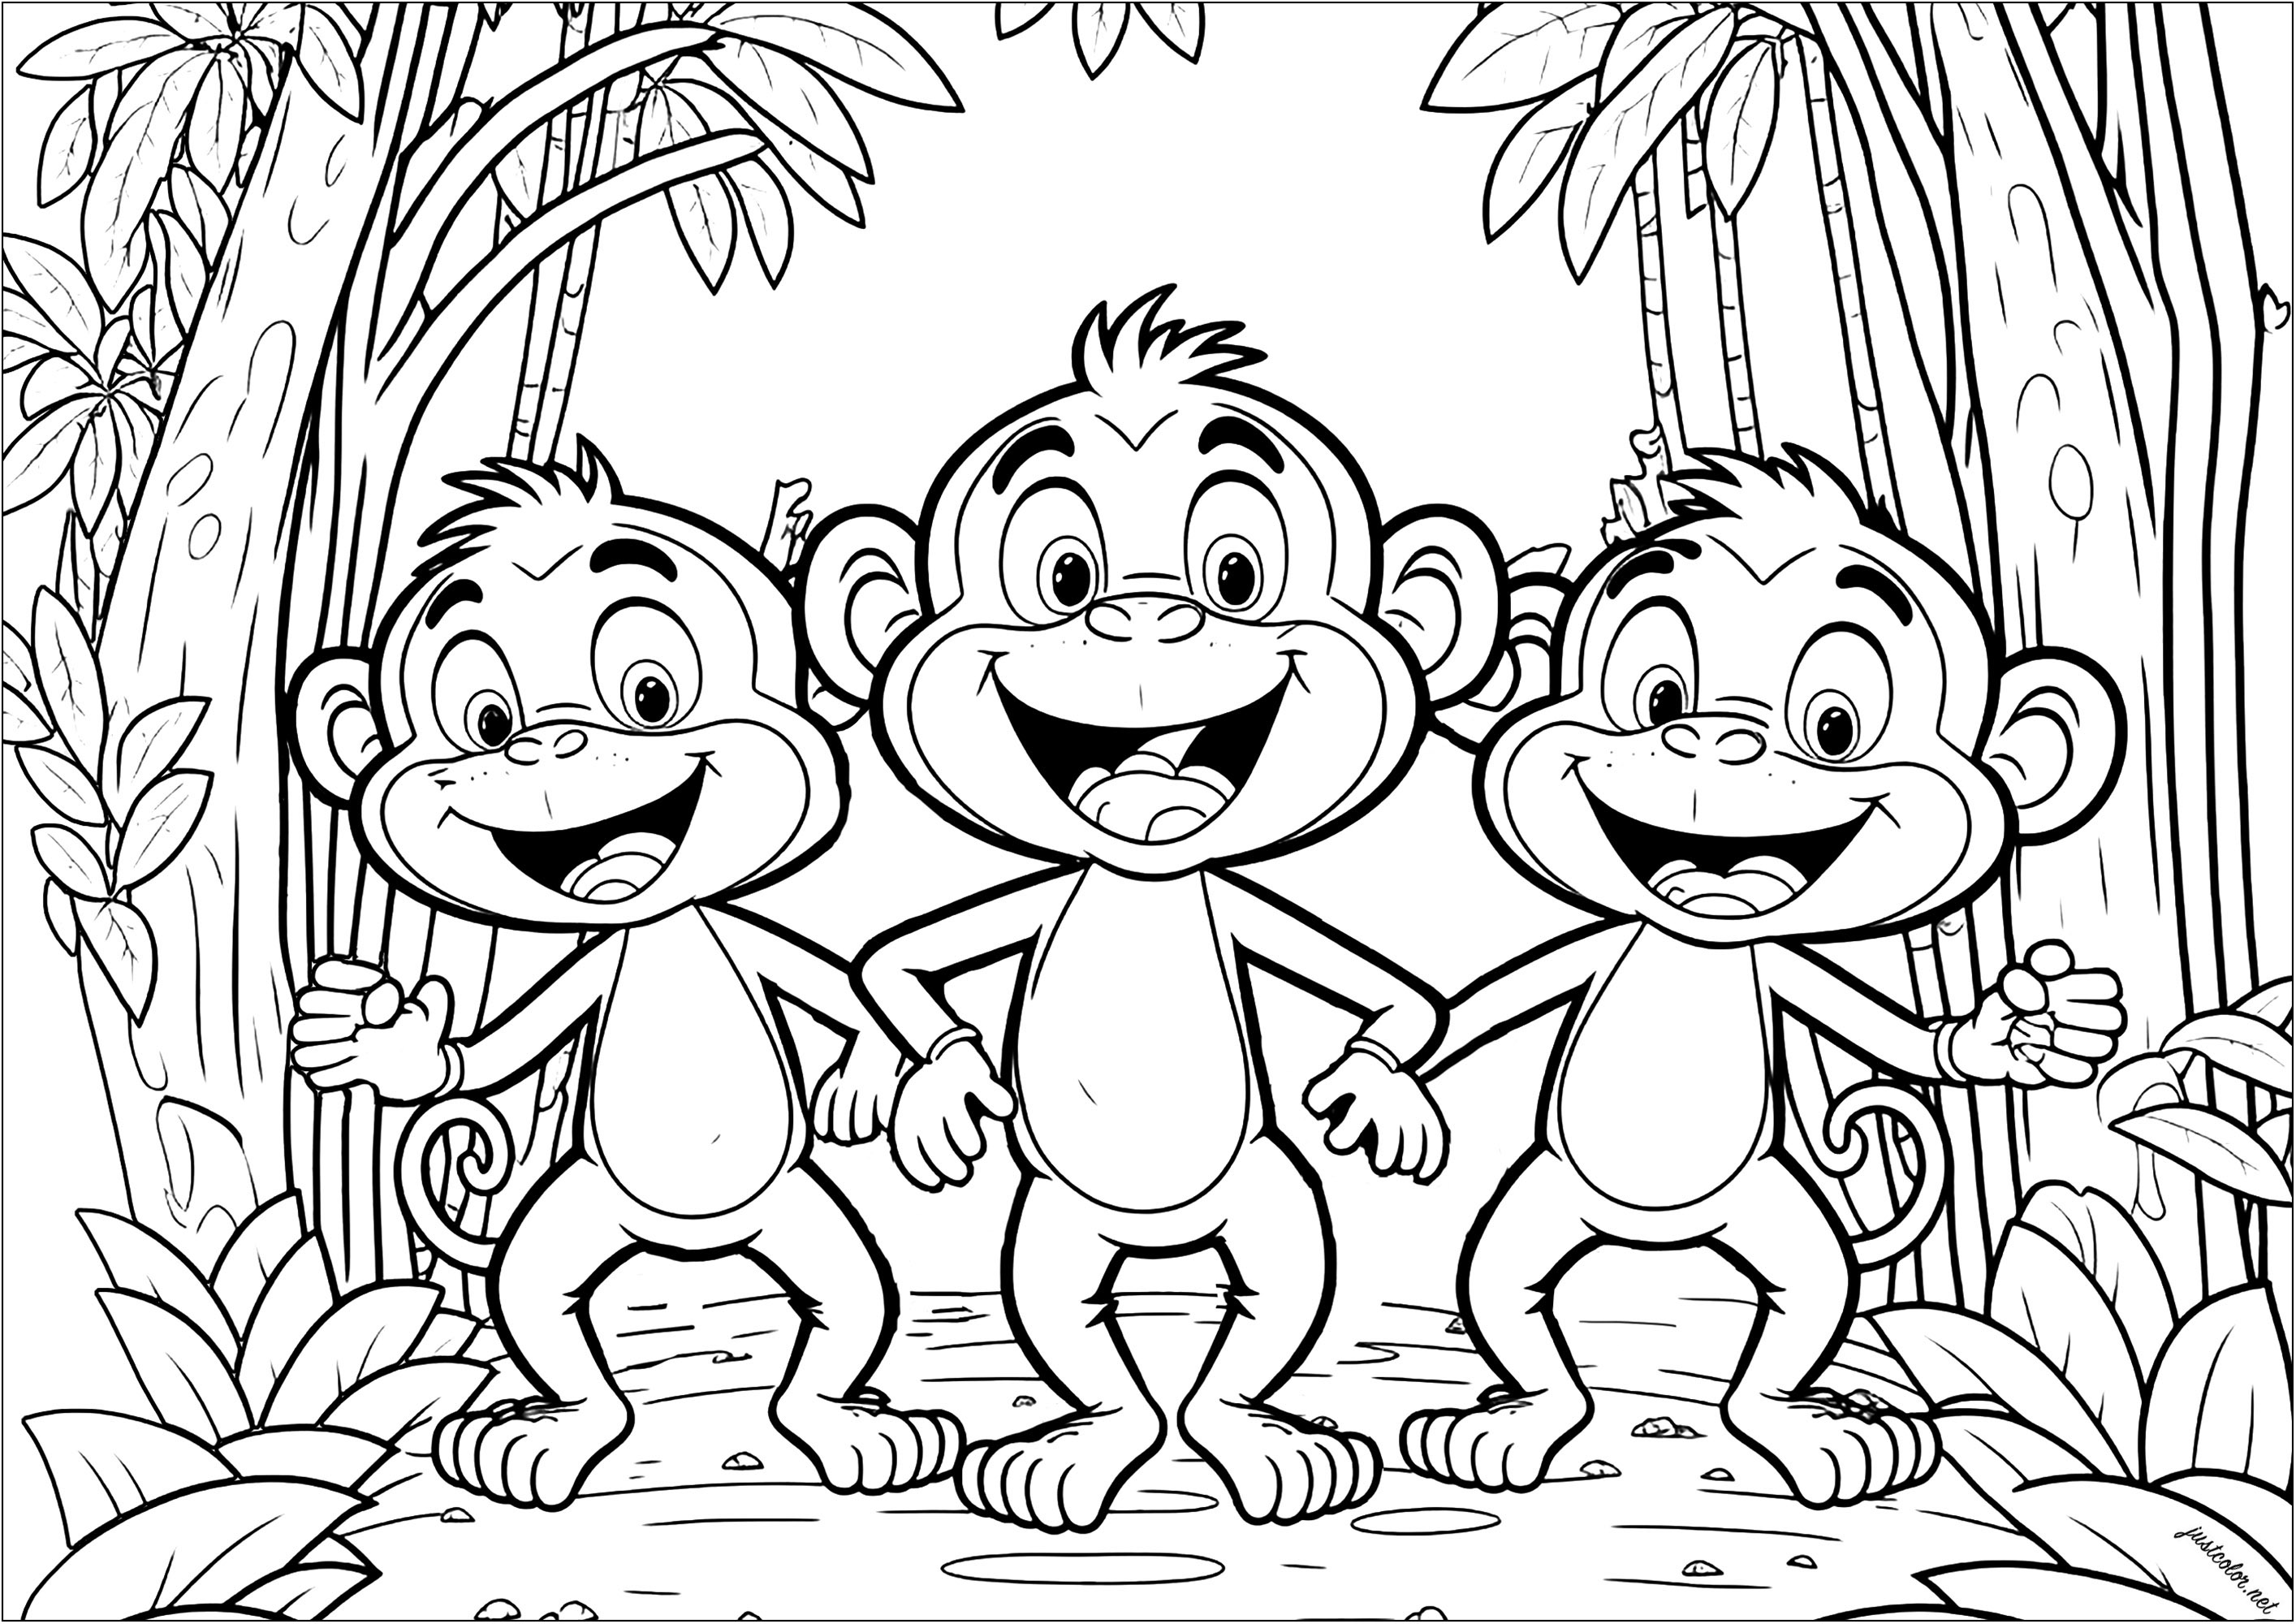 Three funny monkeys in the jungle - Monkeys Adult Coloring Pages